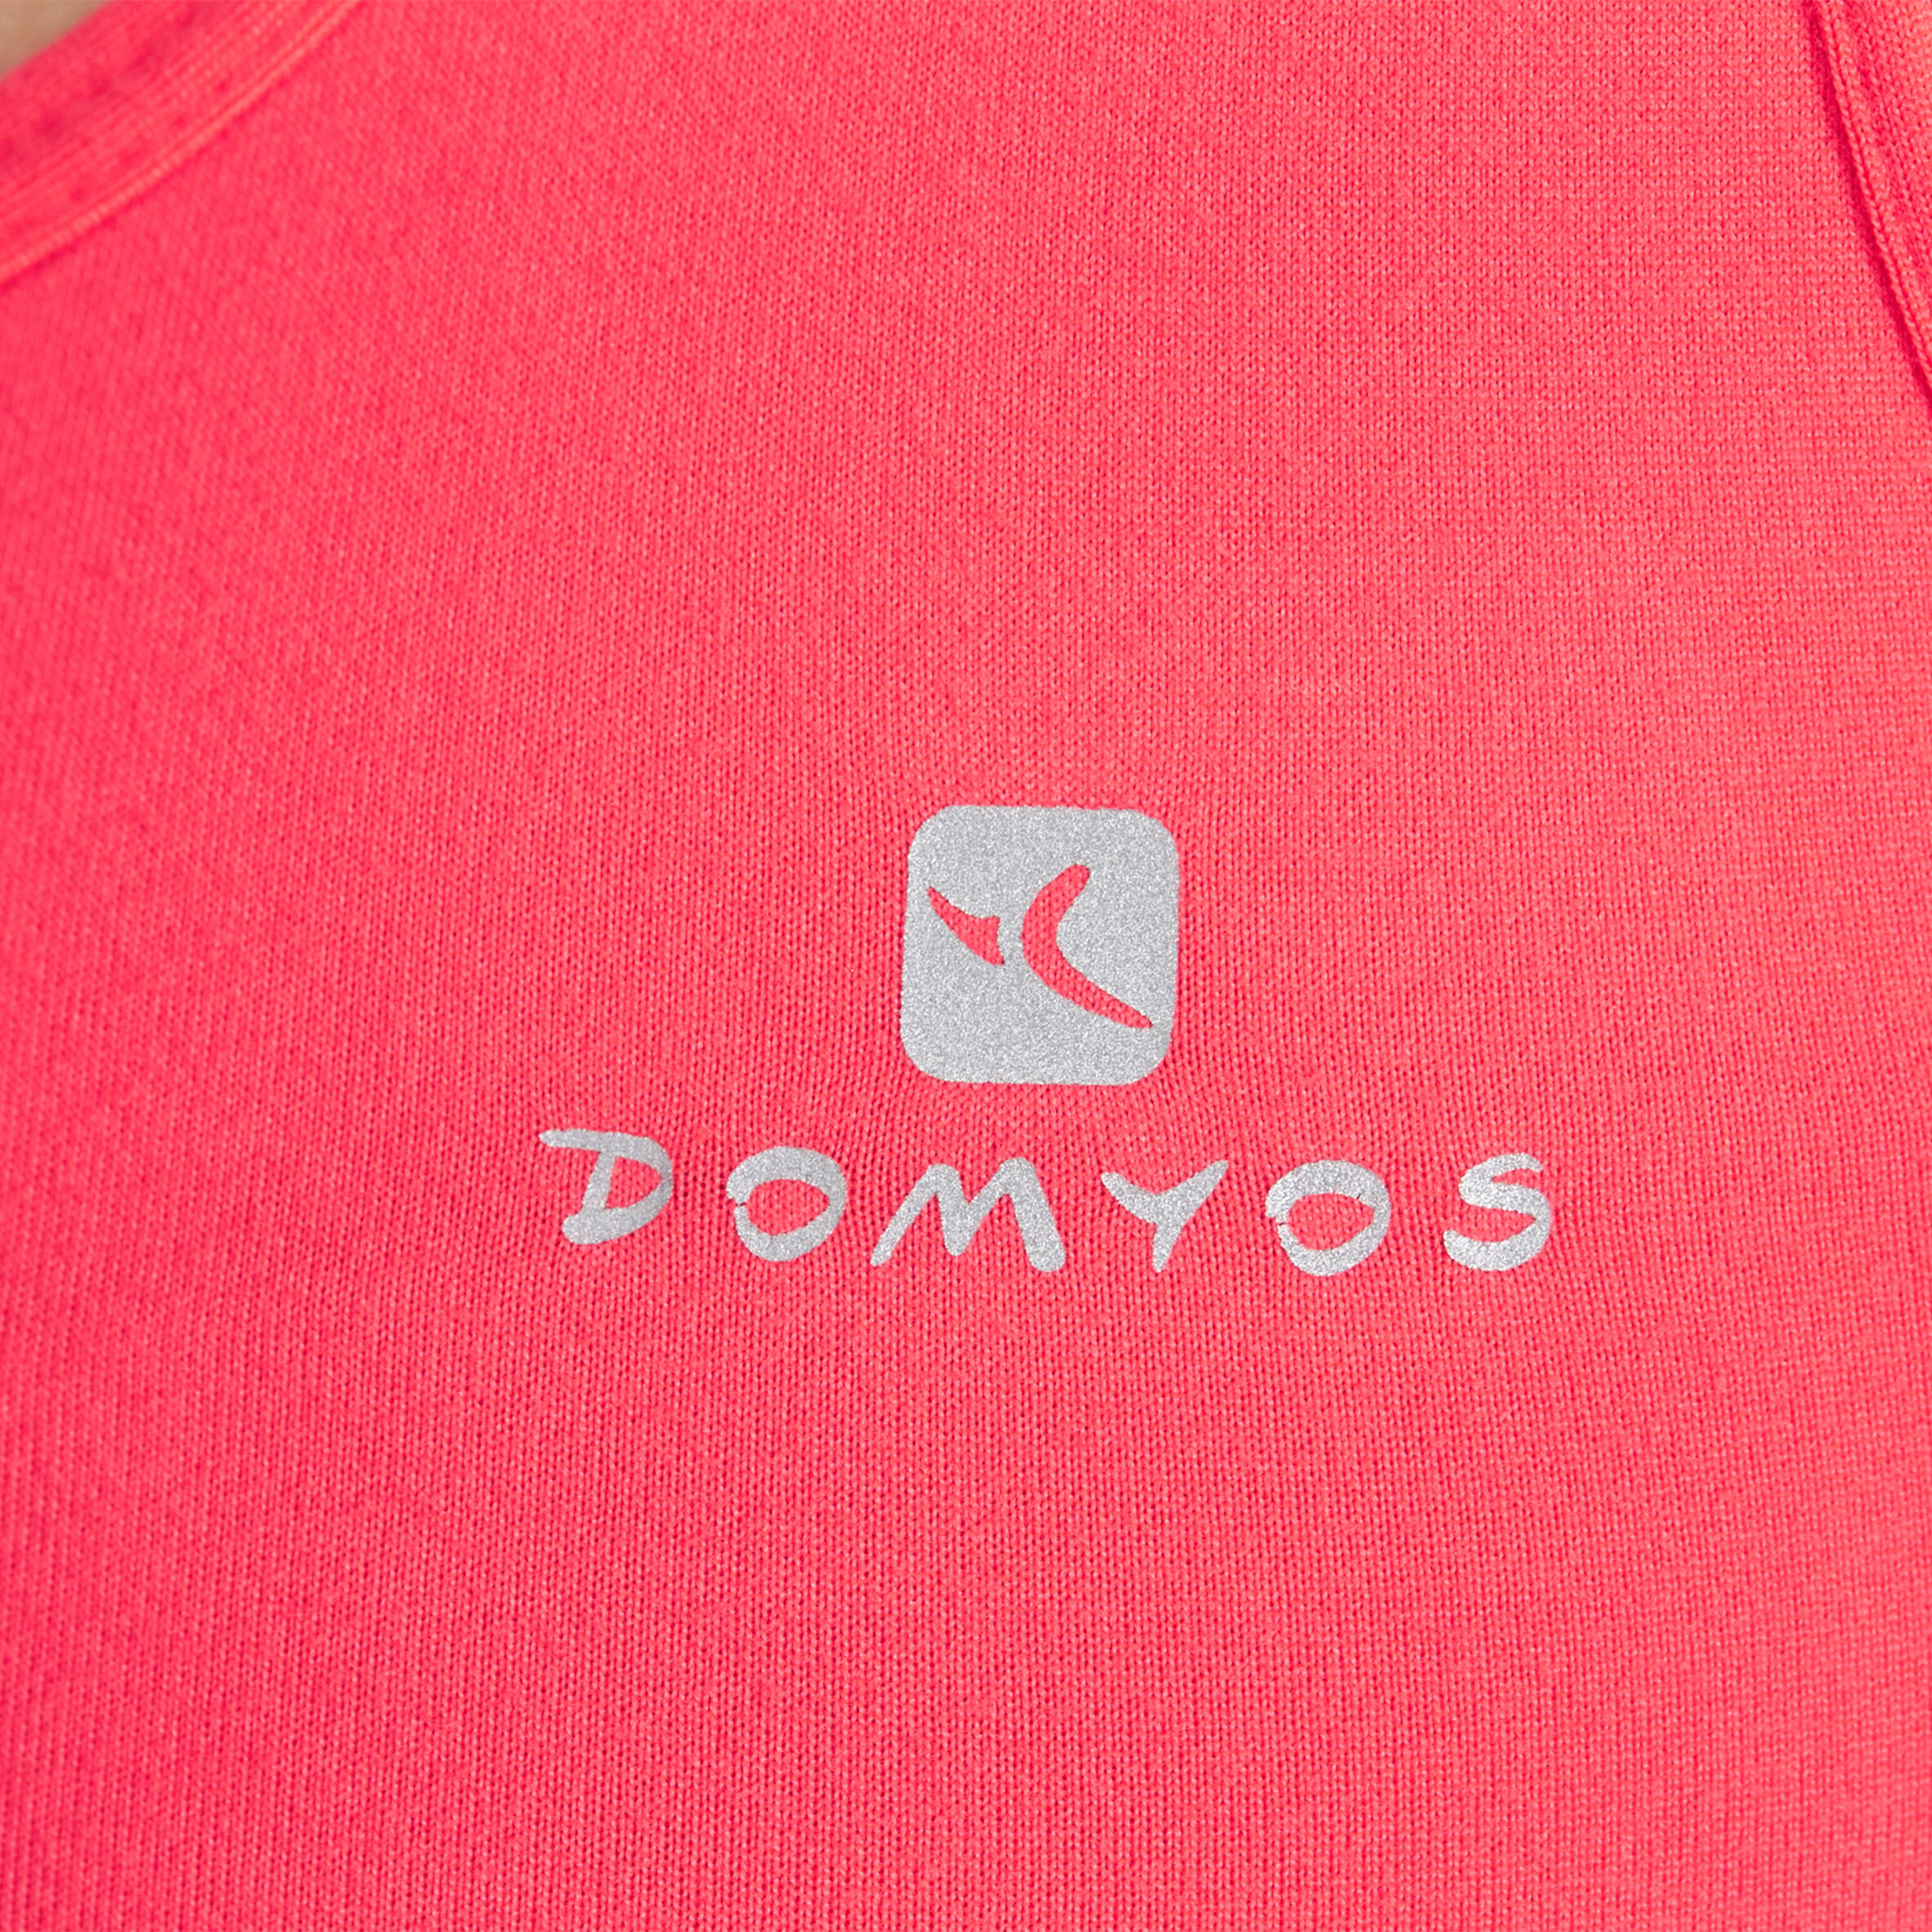 My Top Women's Fitness Tank Top - Pink/Red 11/11